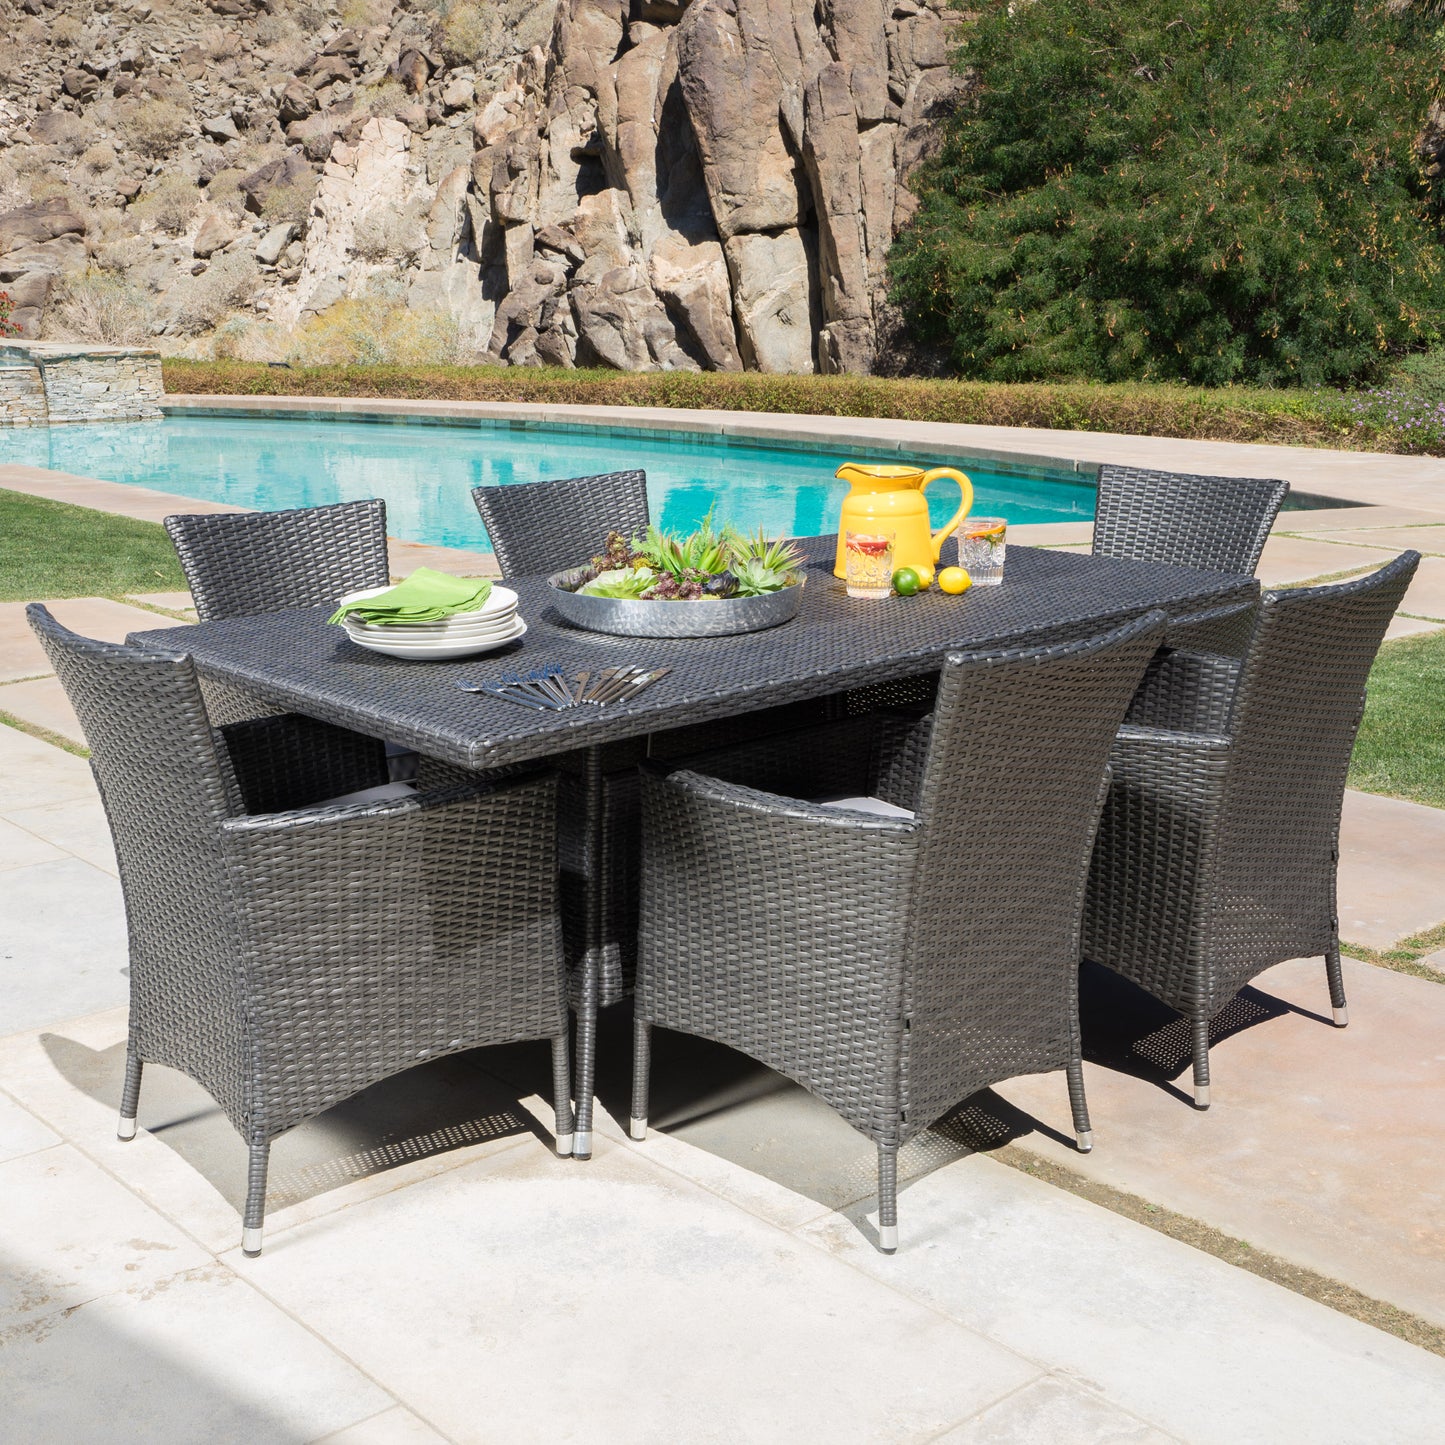 Macalla Outdoor 7-Piece Gray Wicker Dining Set with Light Gray Cushions